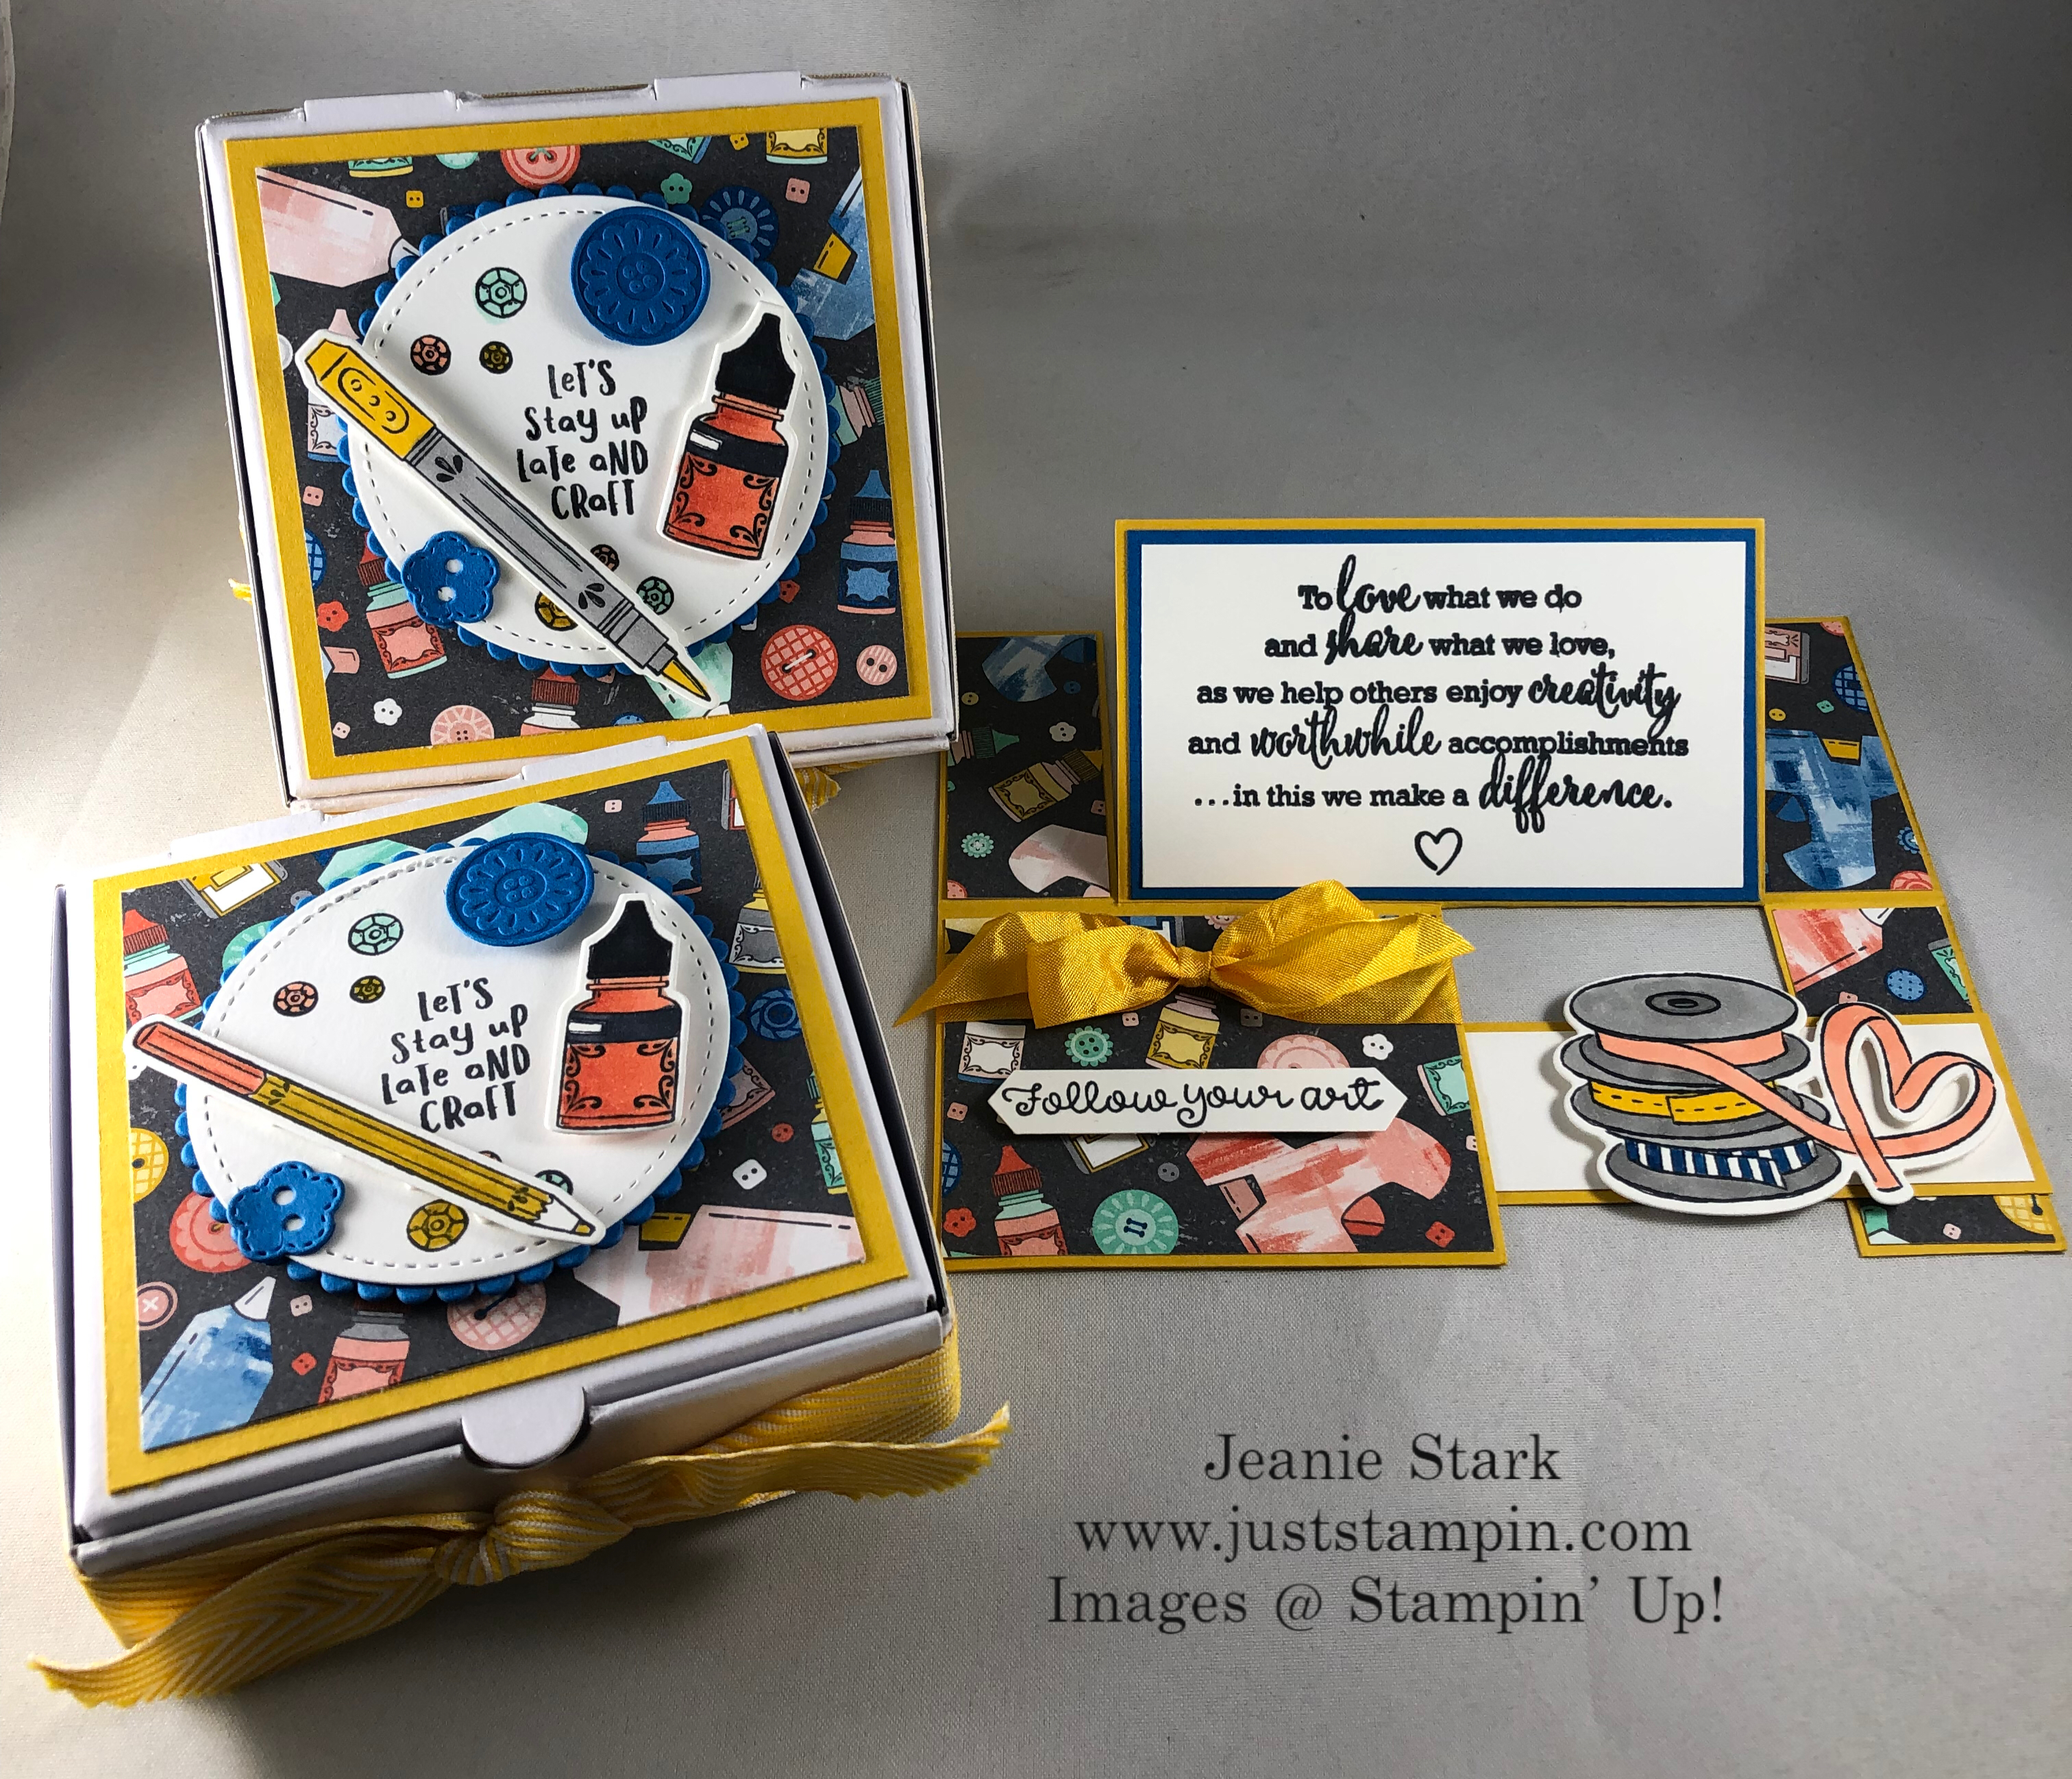 Stampin' Up! It Starts with Art stamp set and Follow Your Art Designer Series Paper Impossible Fun fold card idea and mini pizza box treat holder - Jeanie Stark StampinUp